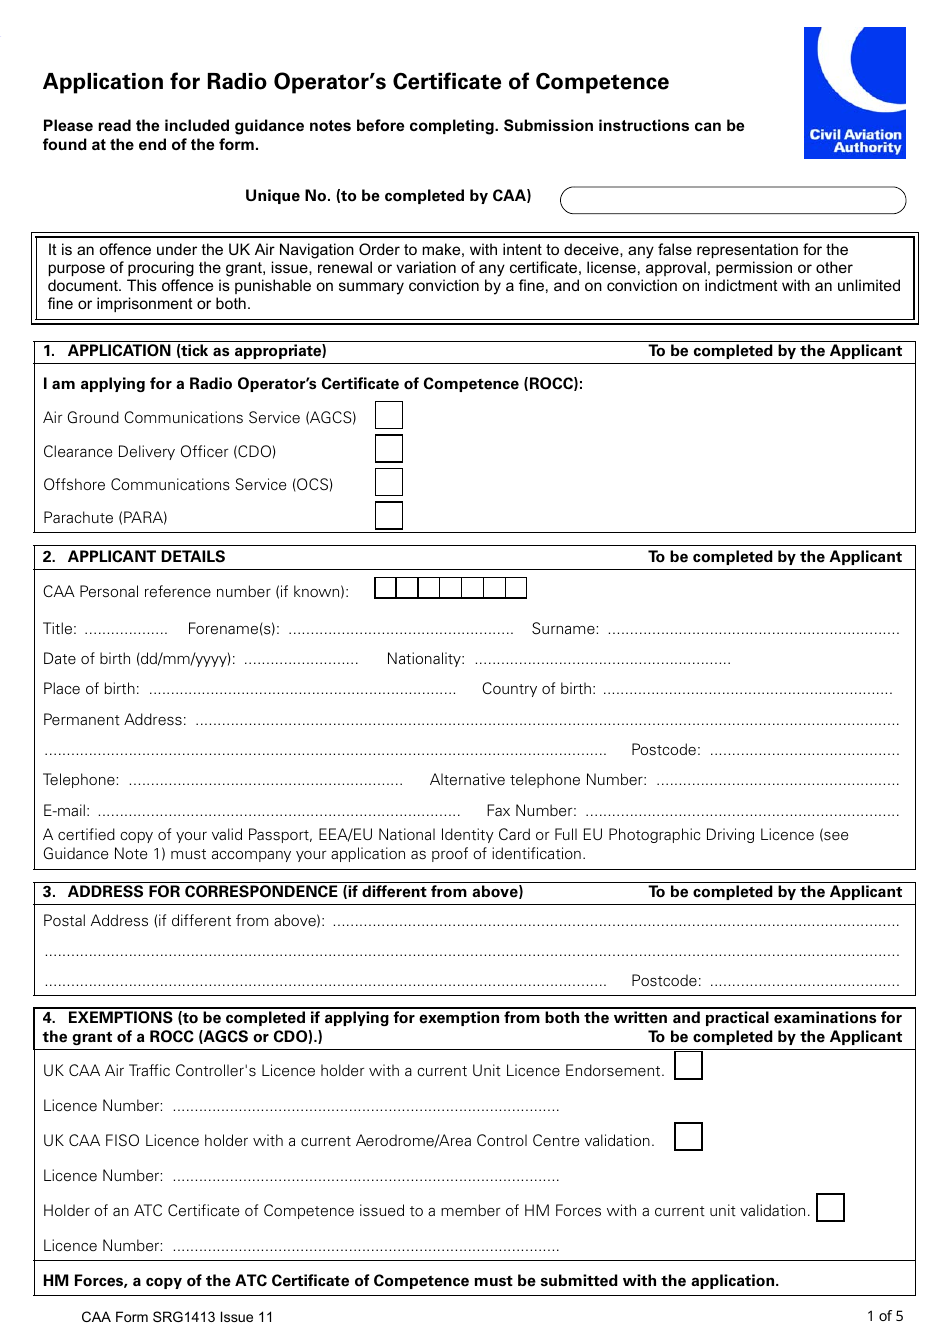 CAA Form SRG1413 Application for Radio Operators Certificate of Competence - United Kingdom, Page 1